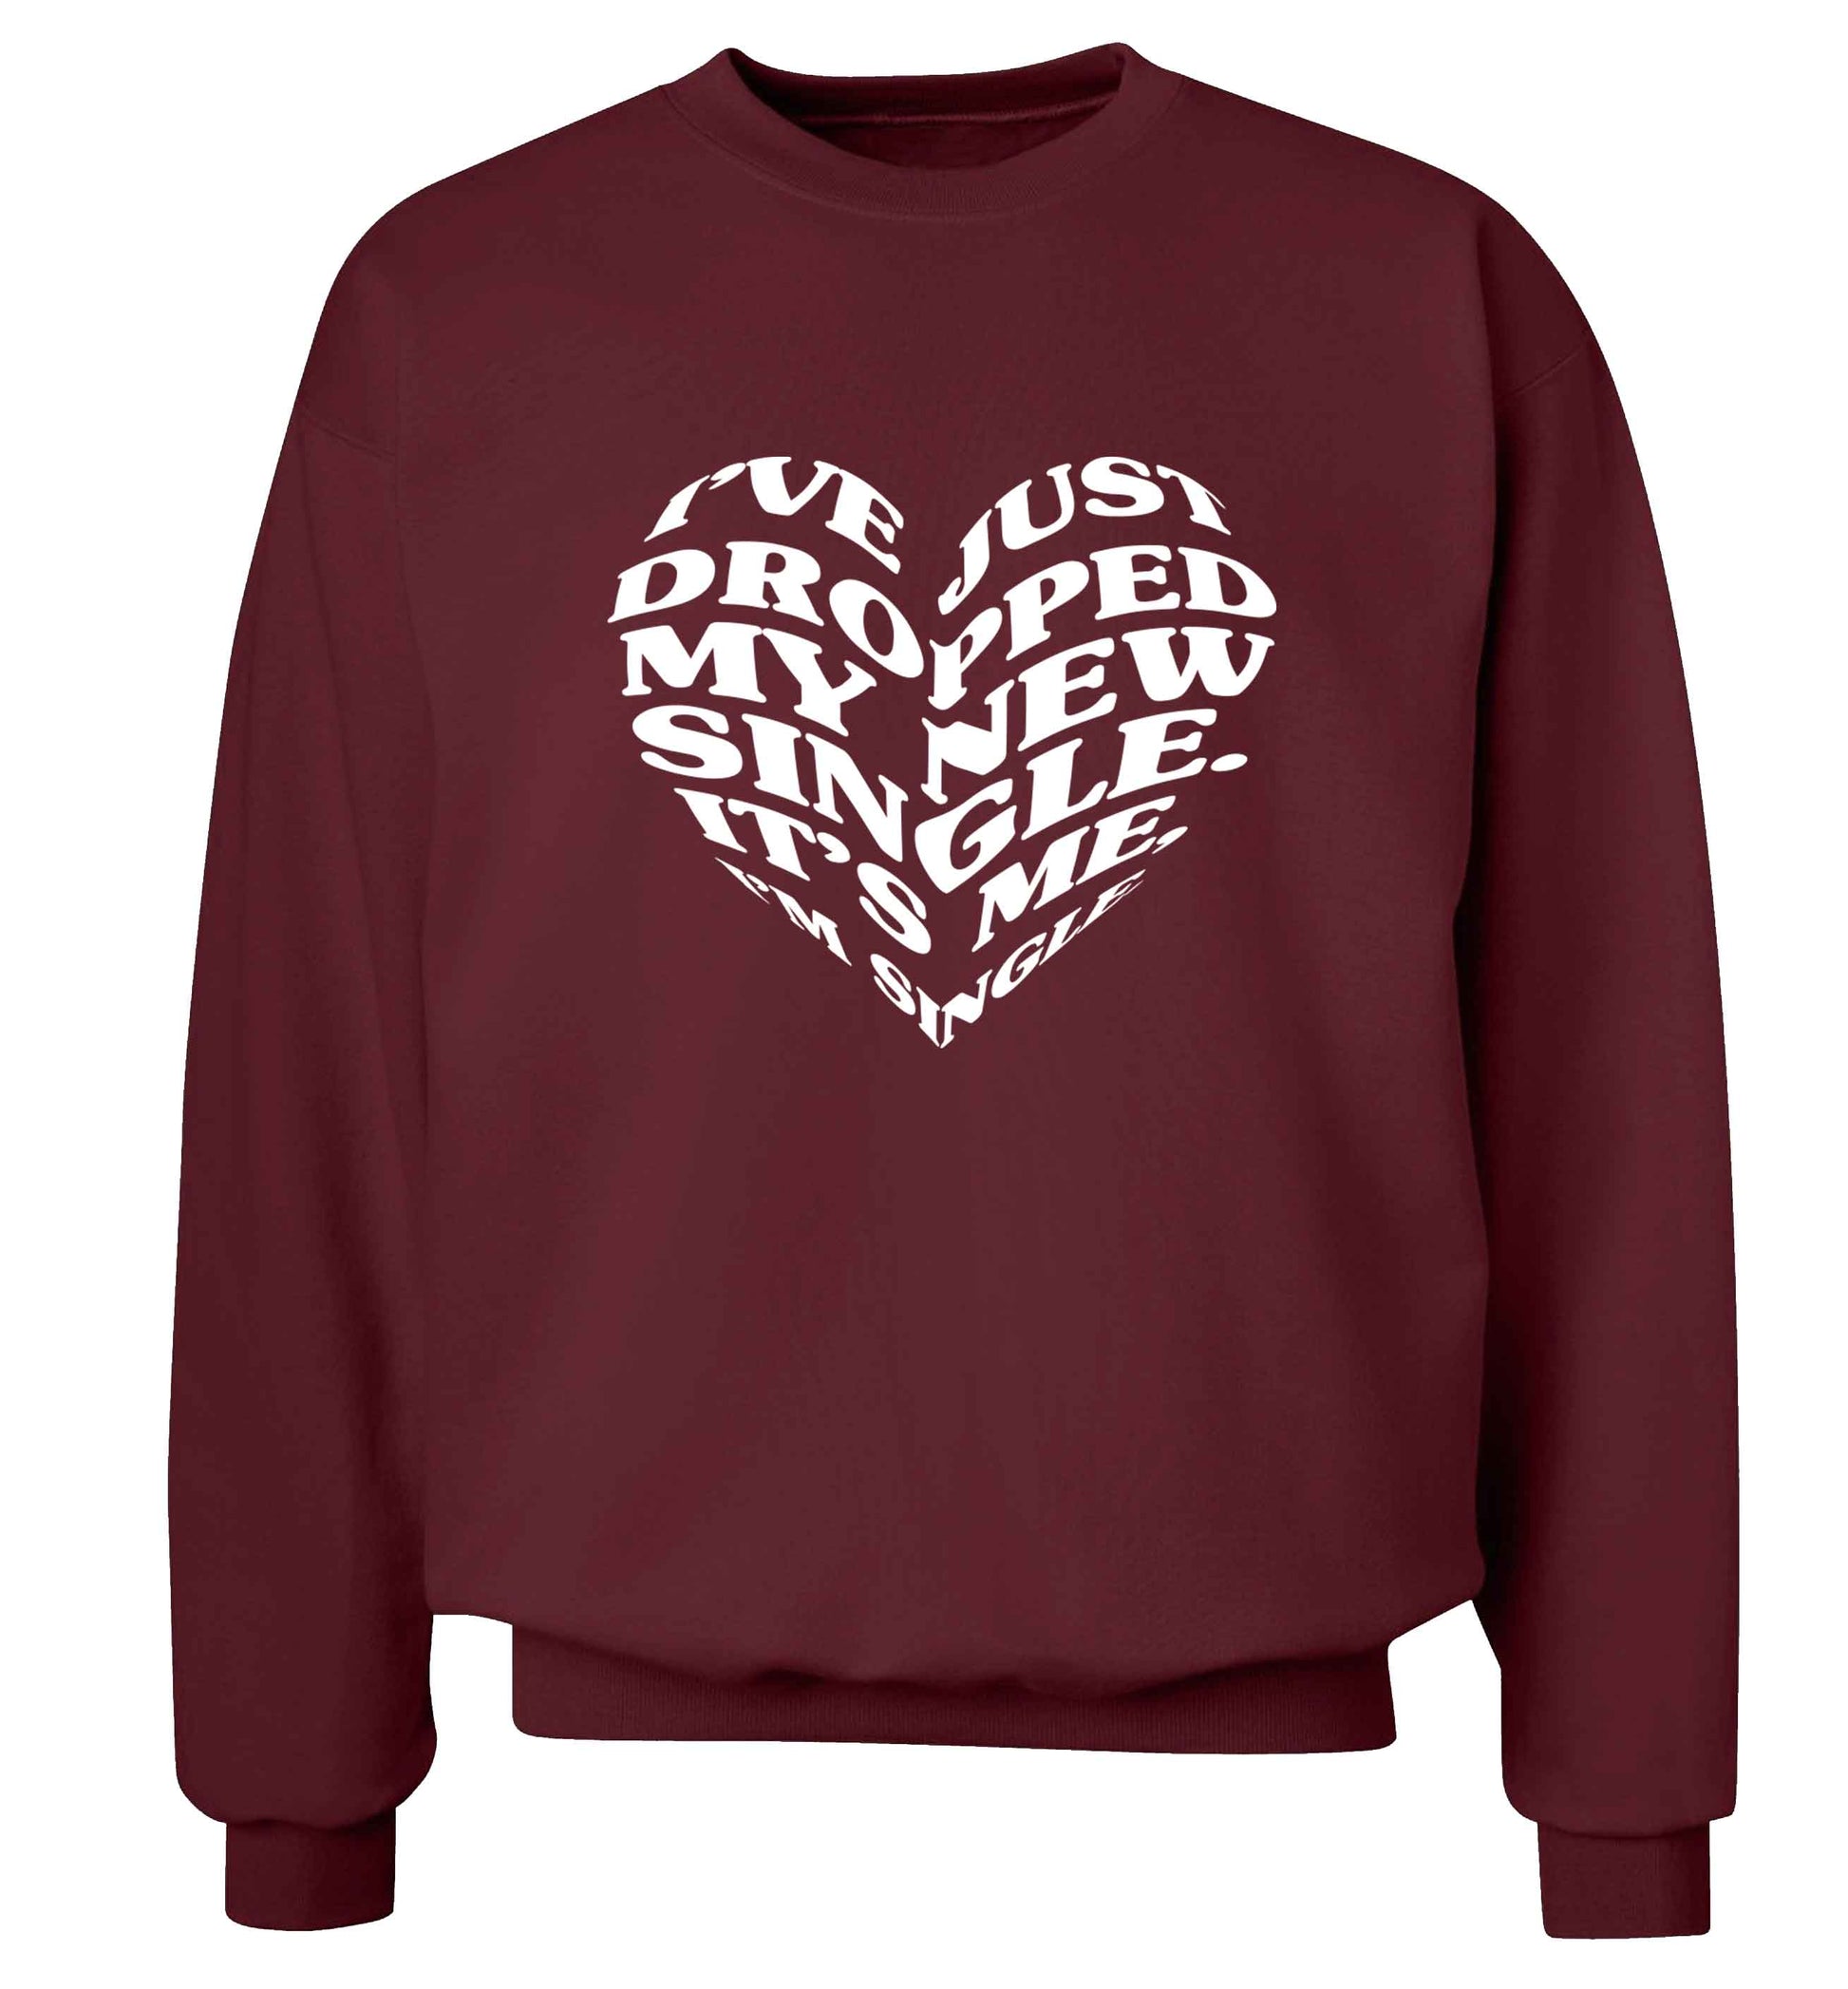 I've just dropped my new single it's me I'm single adult's unisex maroon sweater 2XL